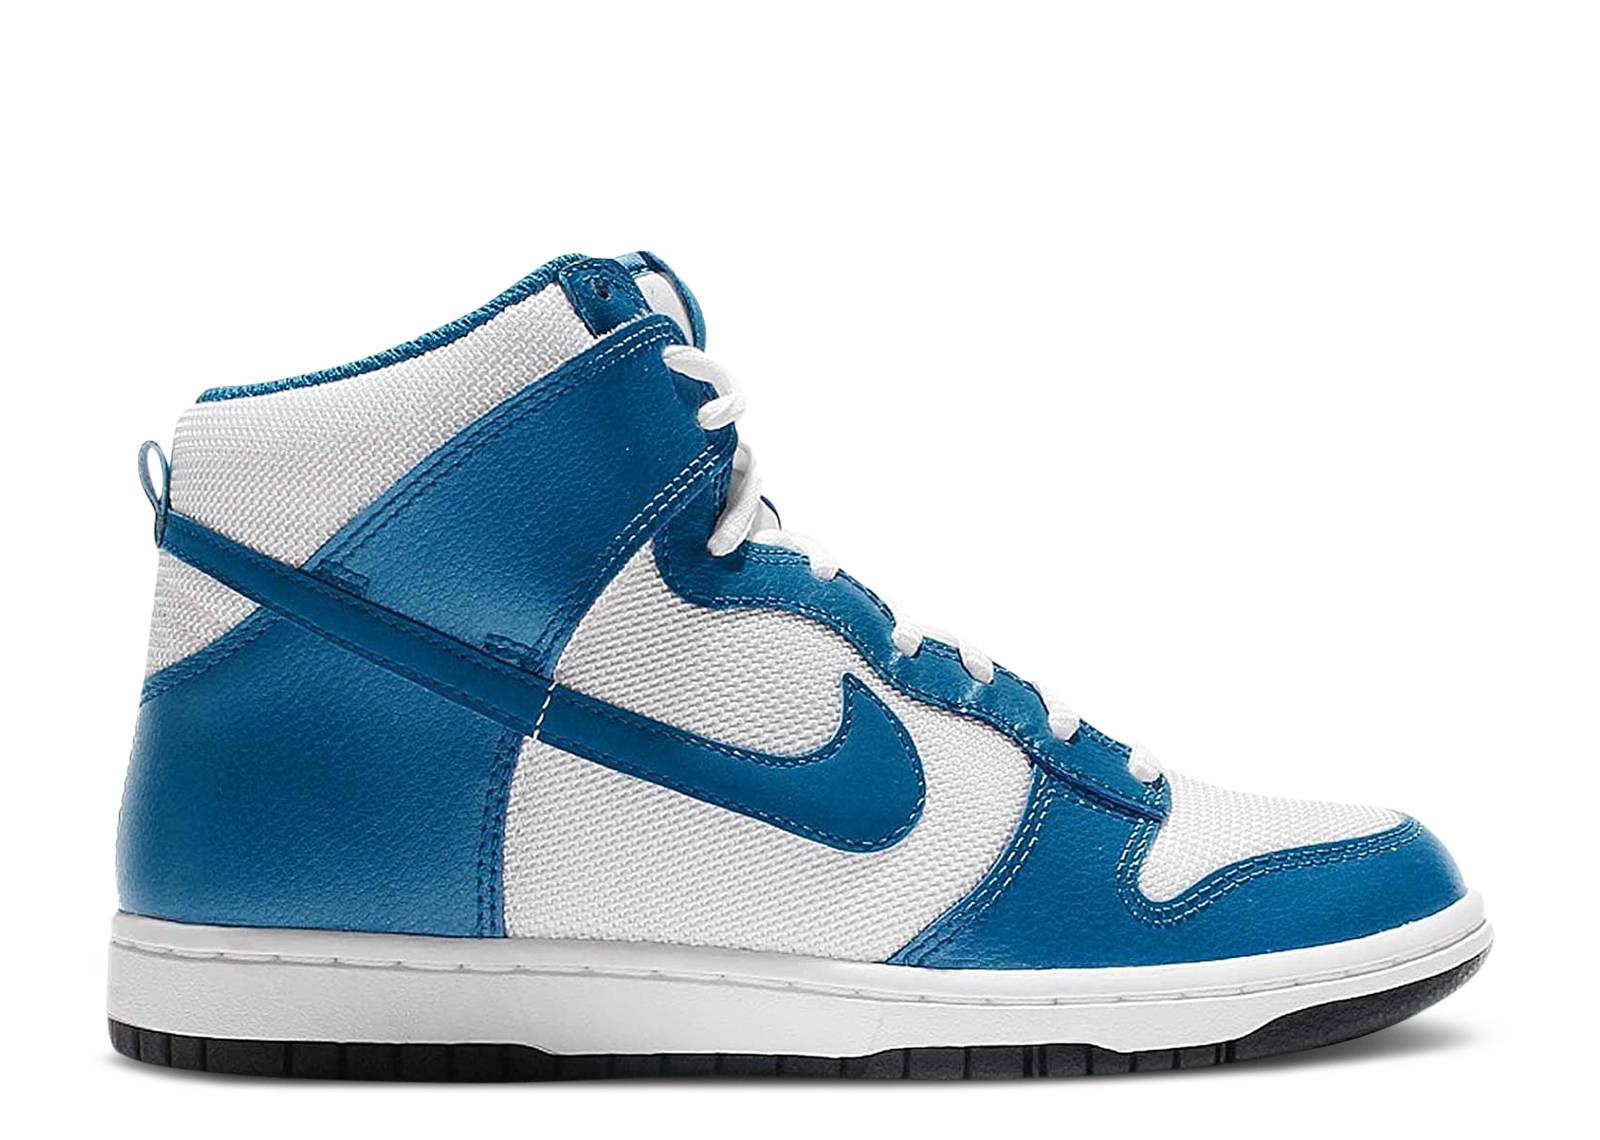 Wmns Dunk High Skinny 'Light Blue Lacquer'